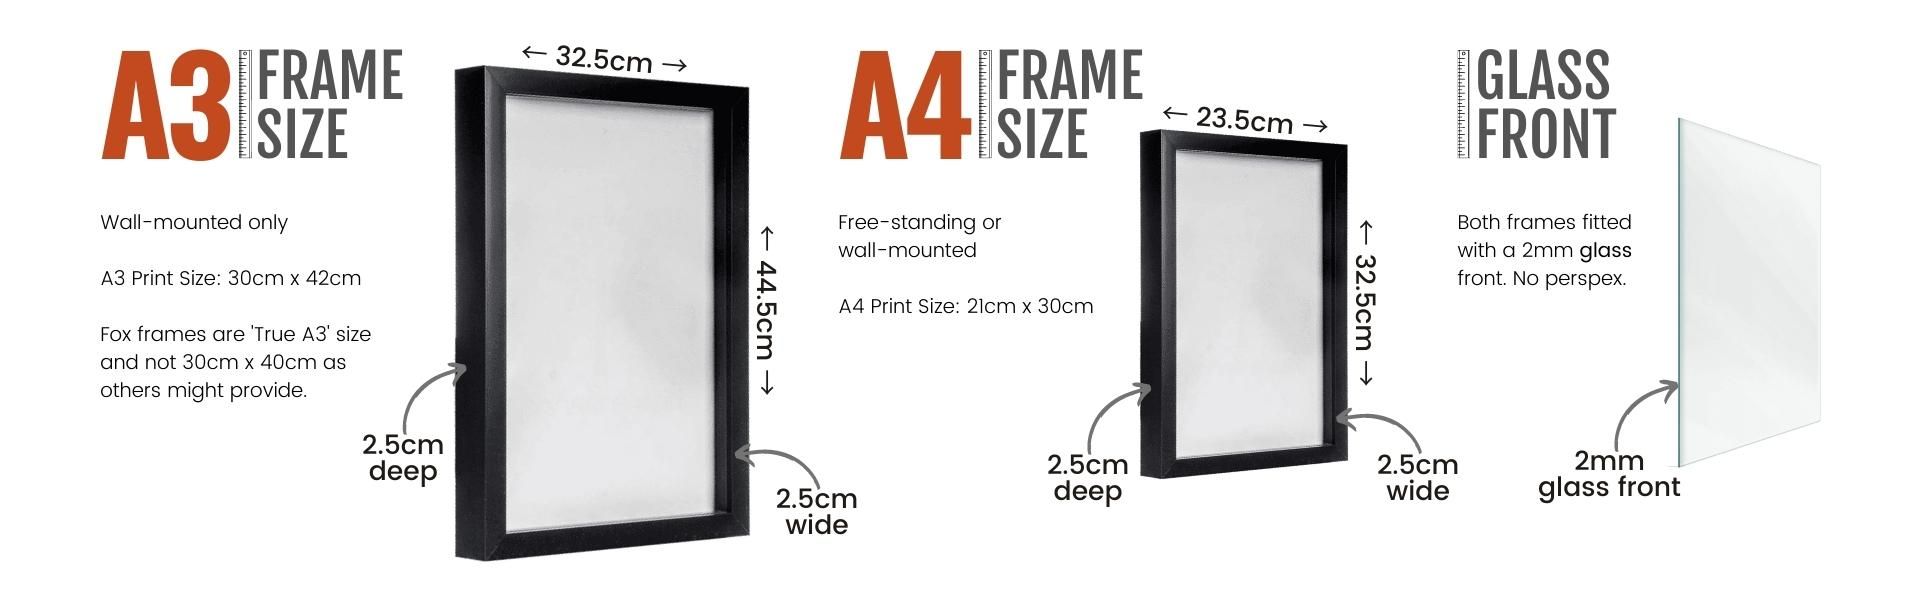 Frame size guide for prints at Fox On The Hill Prints - A3 (32.5cm x 44.5cm) A4 (23.5cm x 32.5cm)